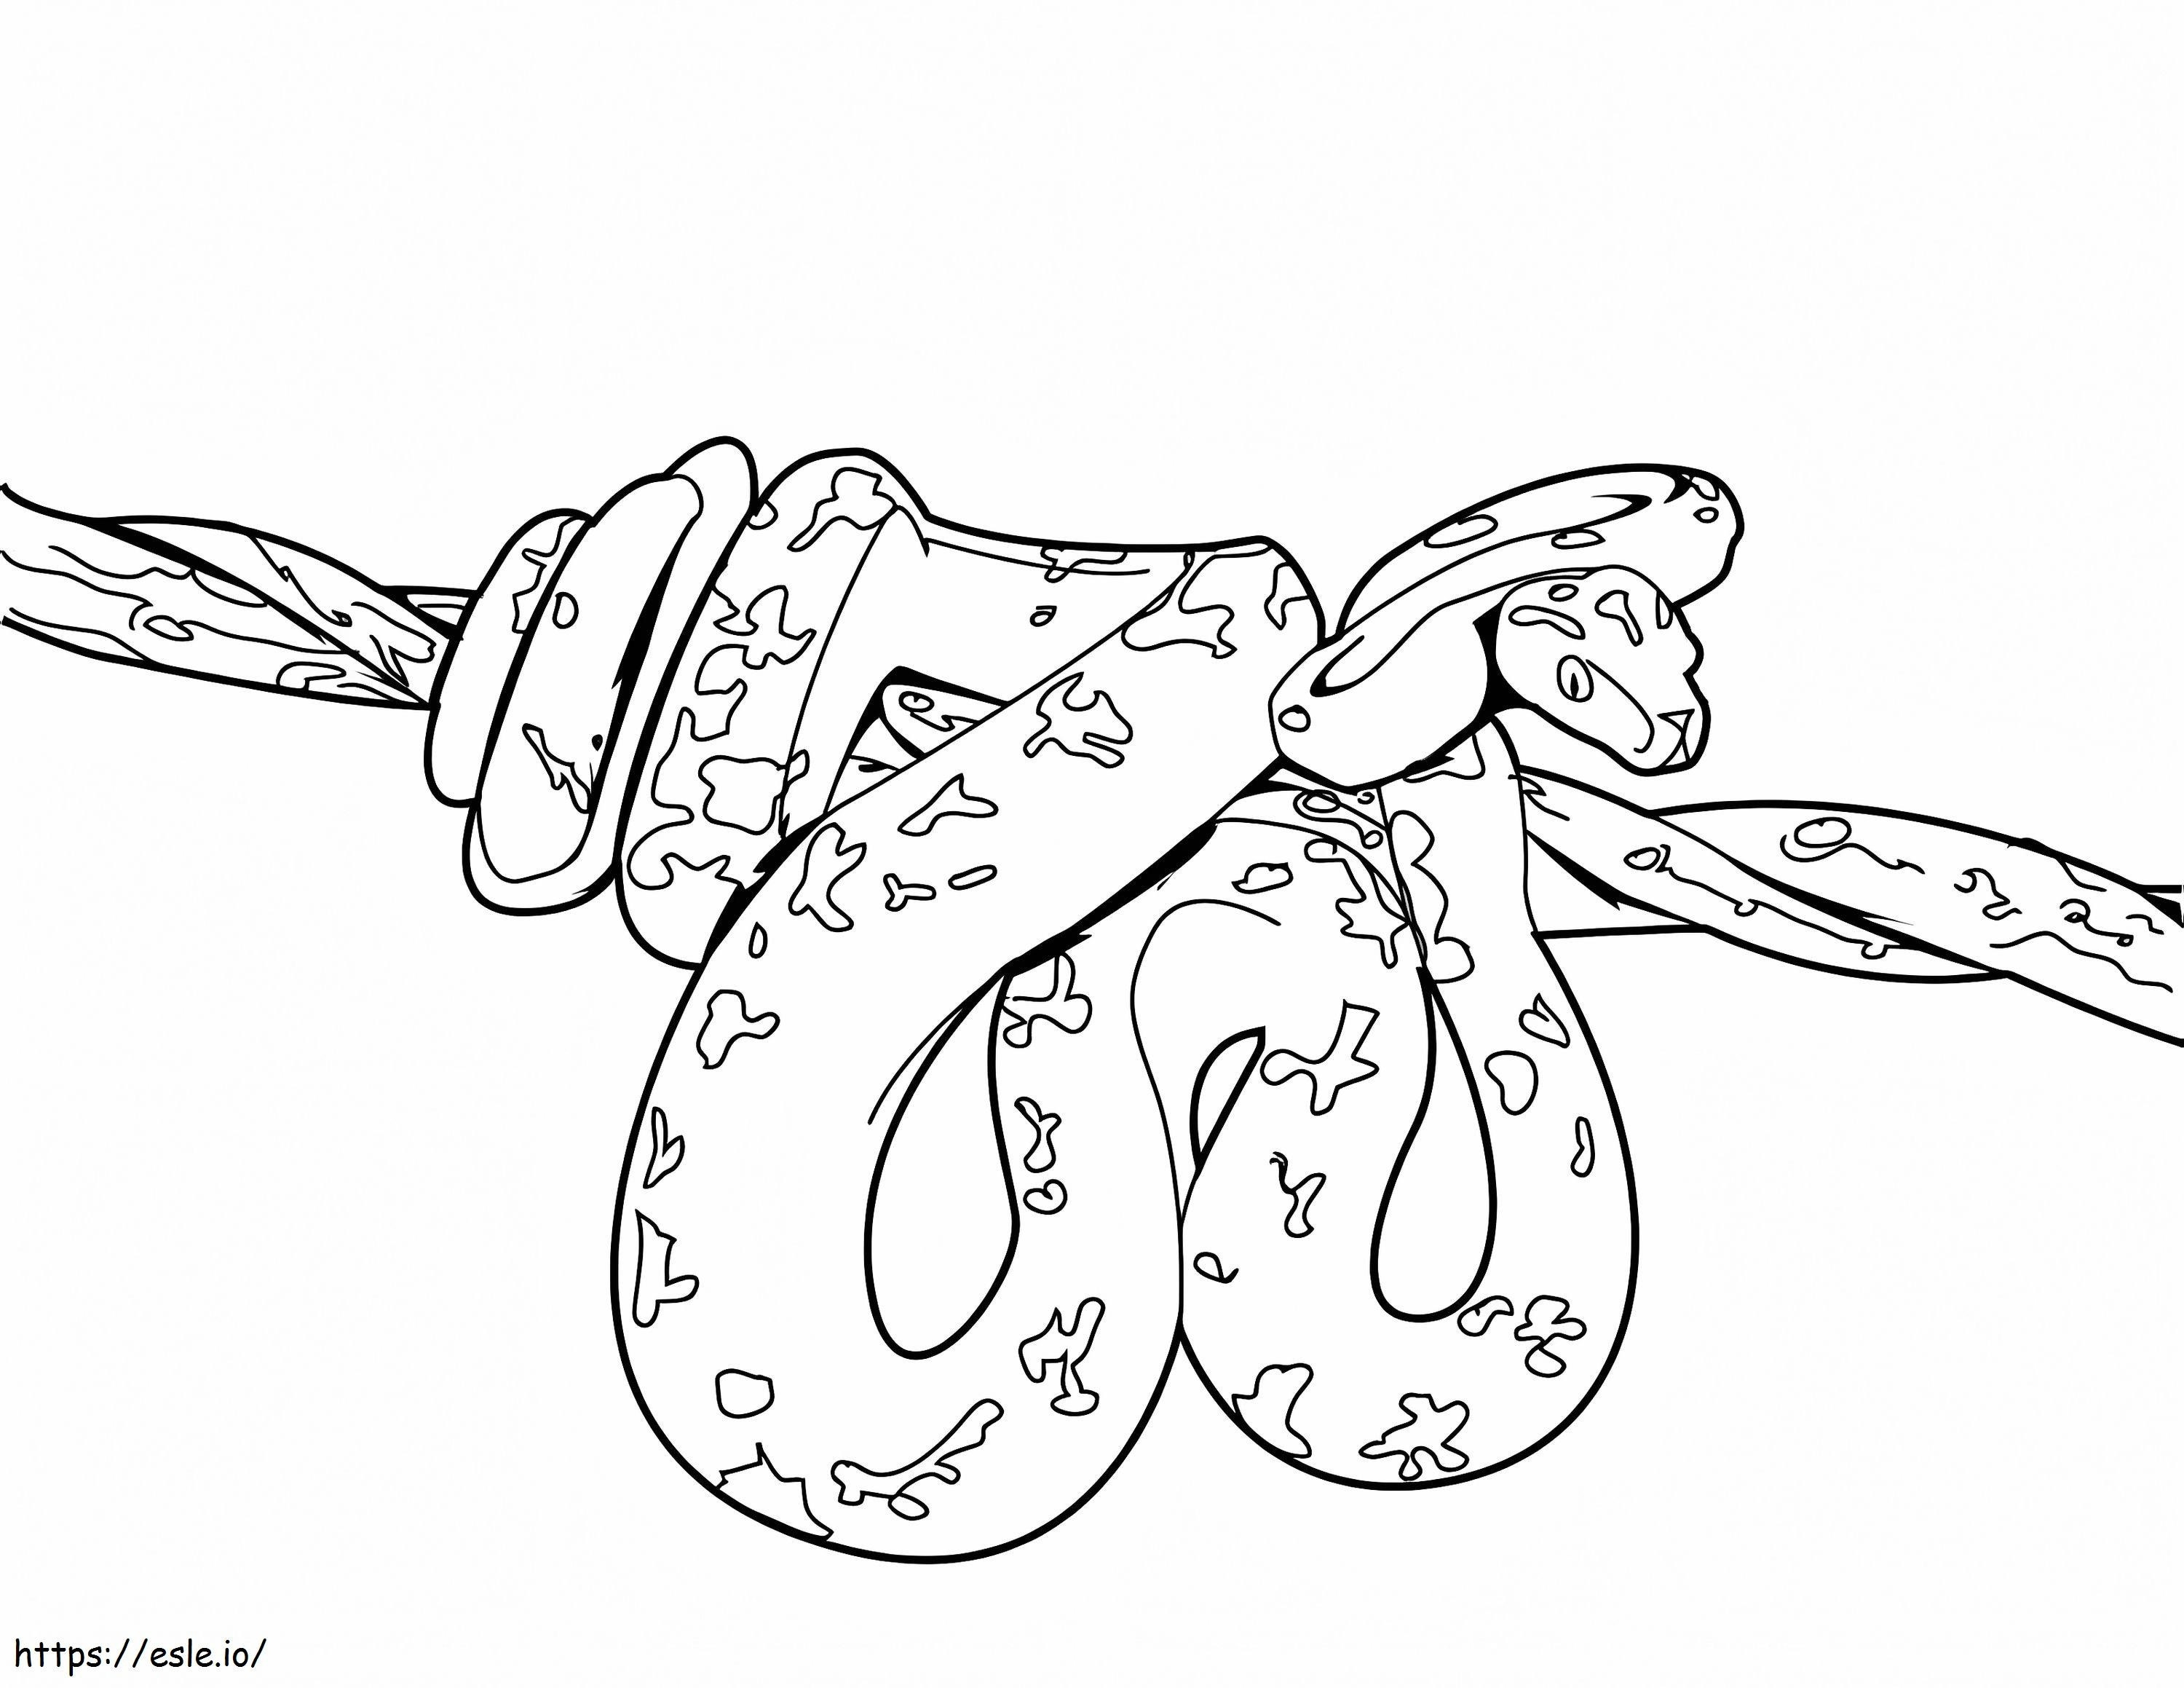 Basic Python Curled Up On A Tree Branch coloring page